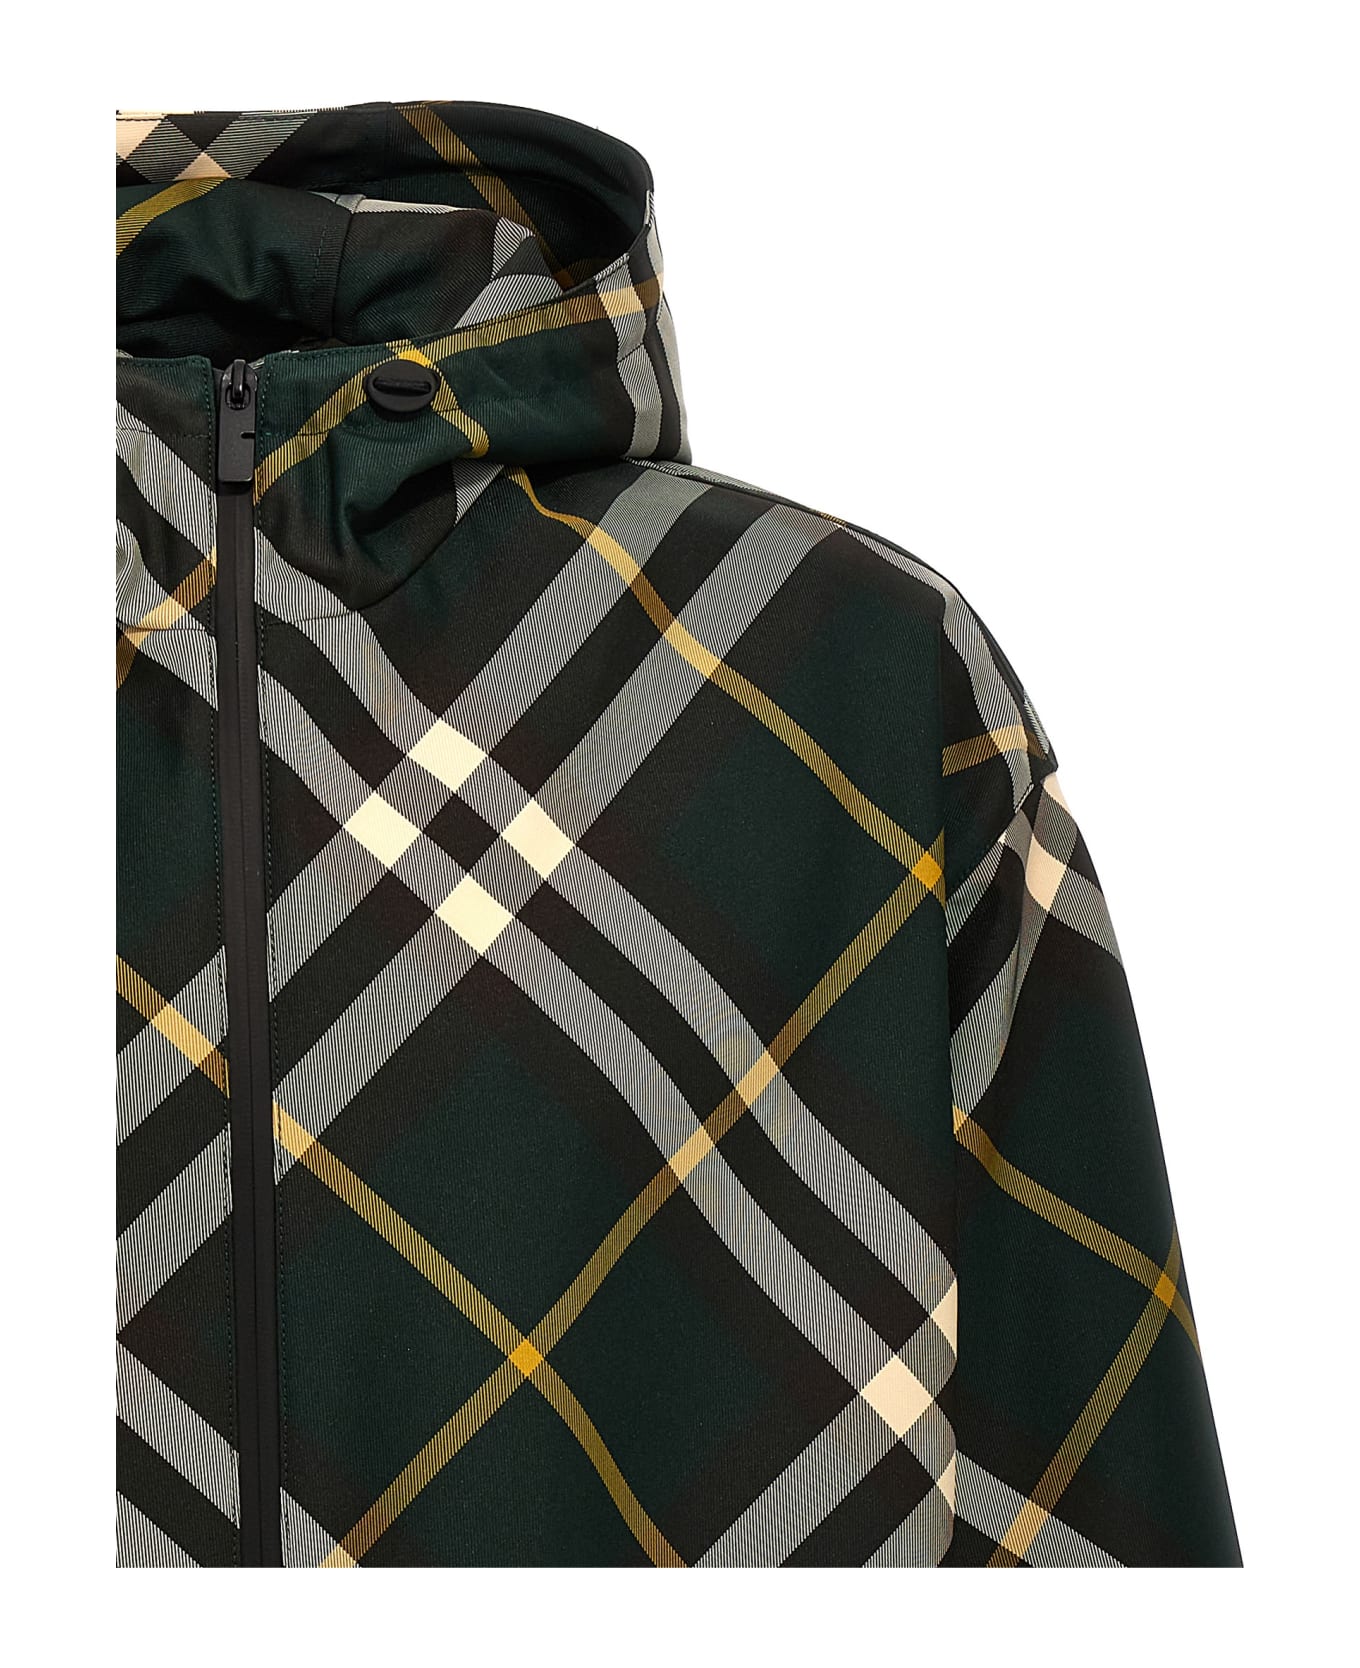 Burberry Check Jacket - Green